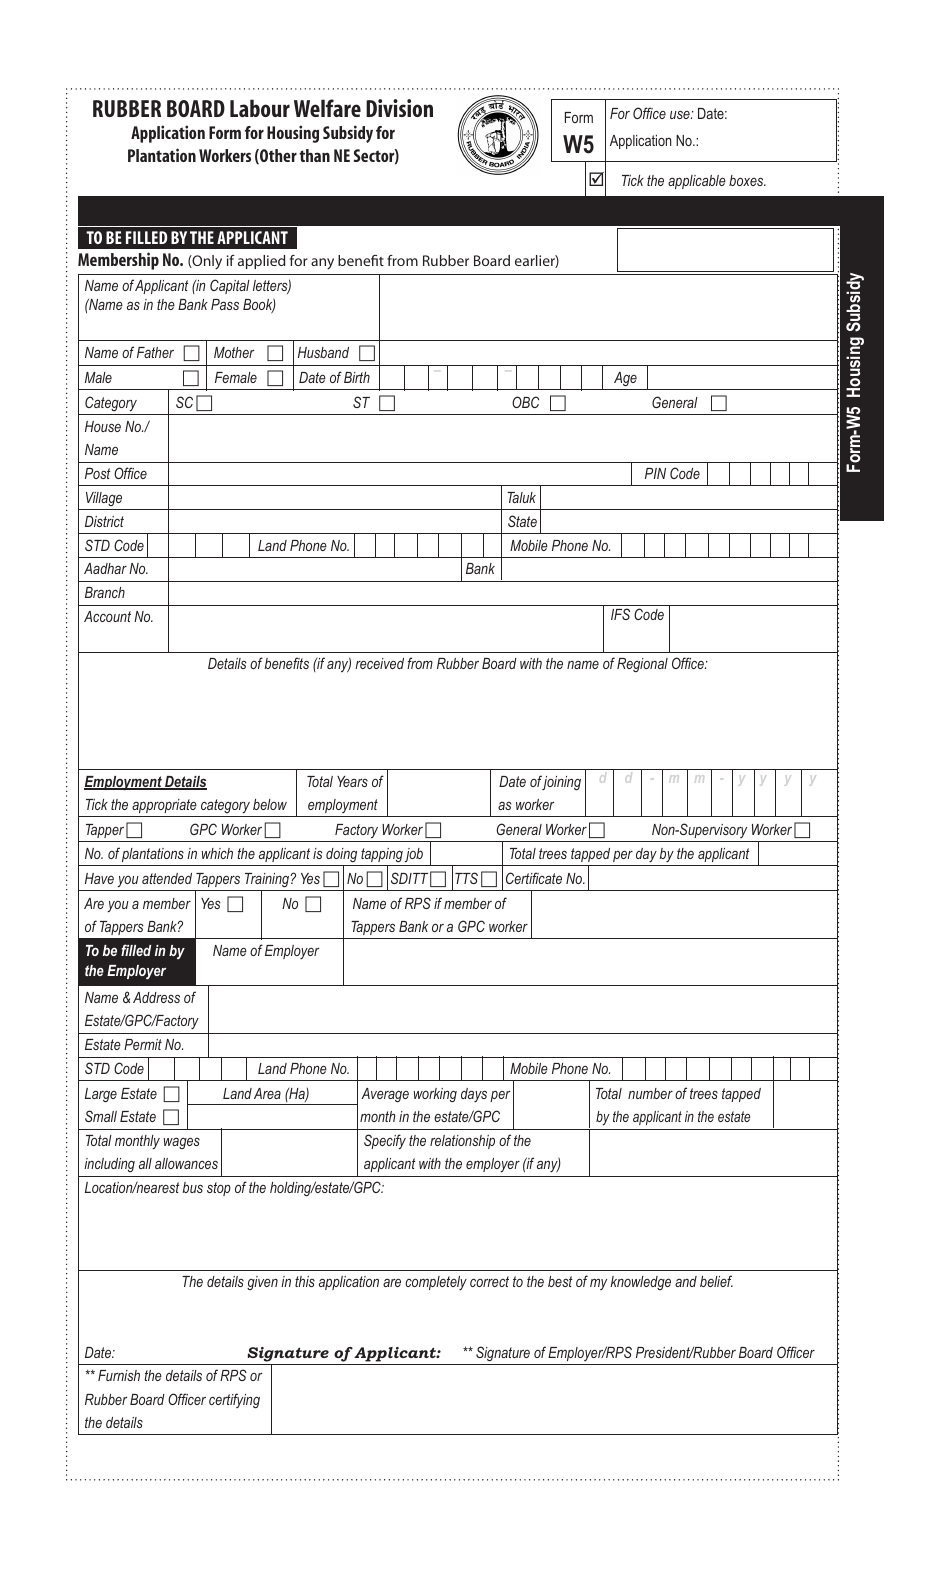 Form W5 Application Form for Housing Subsidy for Plantation Workers (Other Than Ne Sector) - India, Page 1